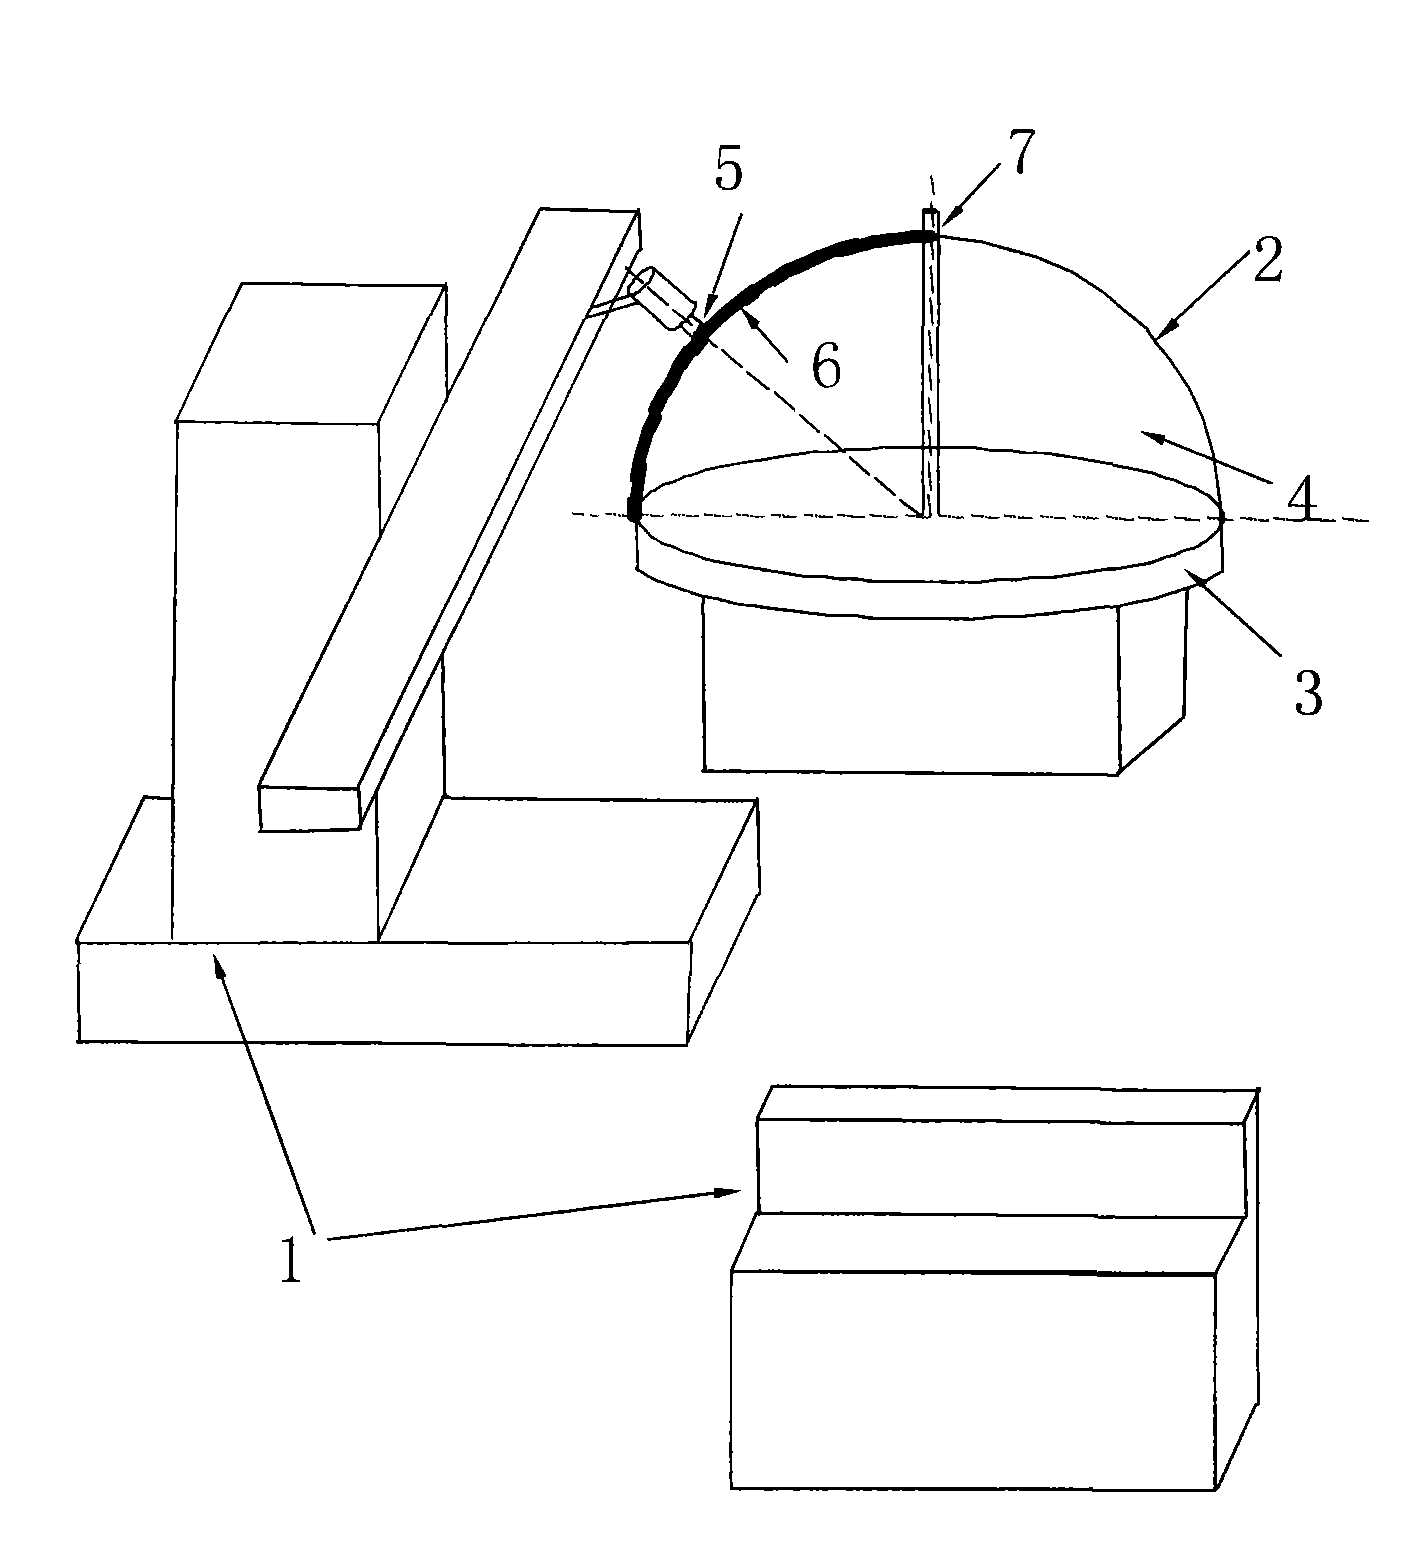 Numerical control stirring friction welding system and welding method thereof